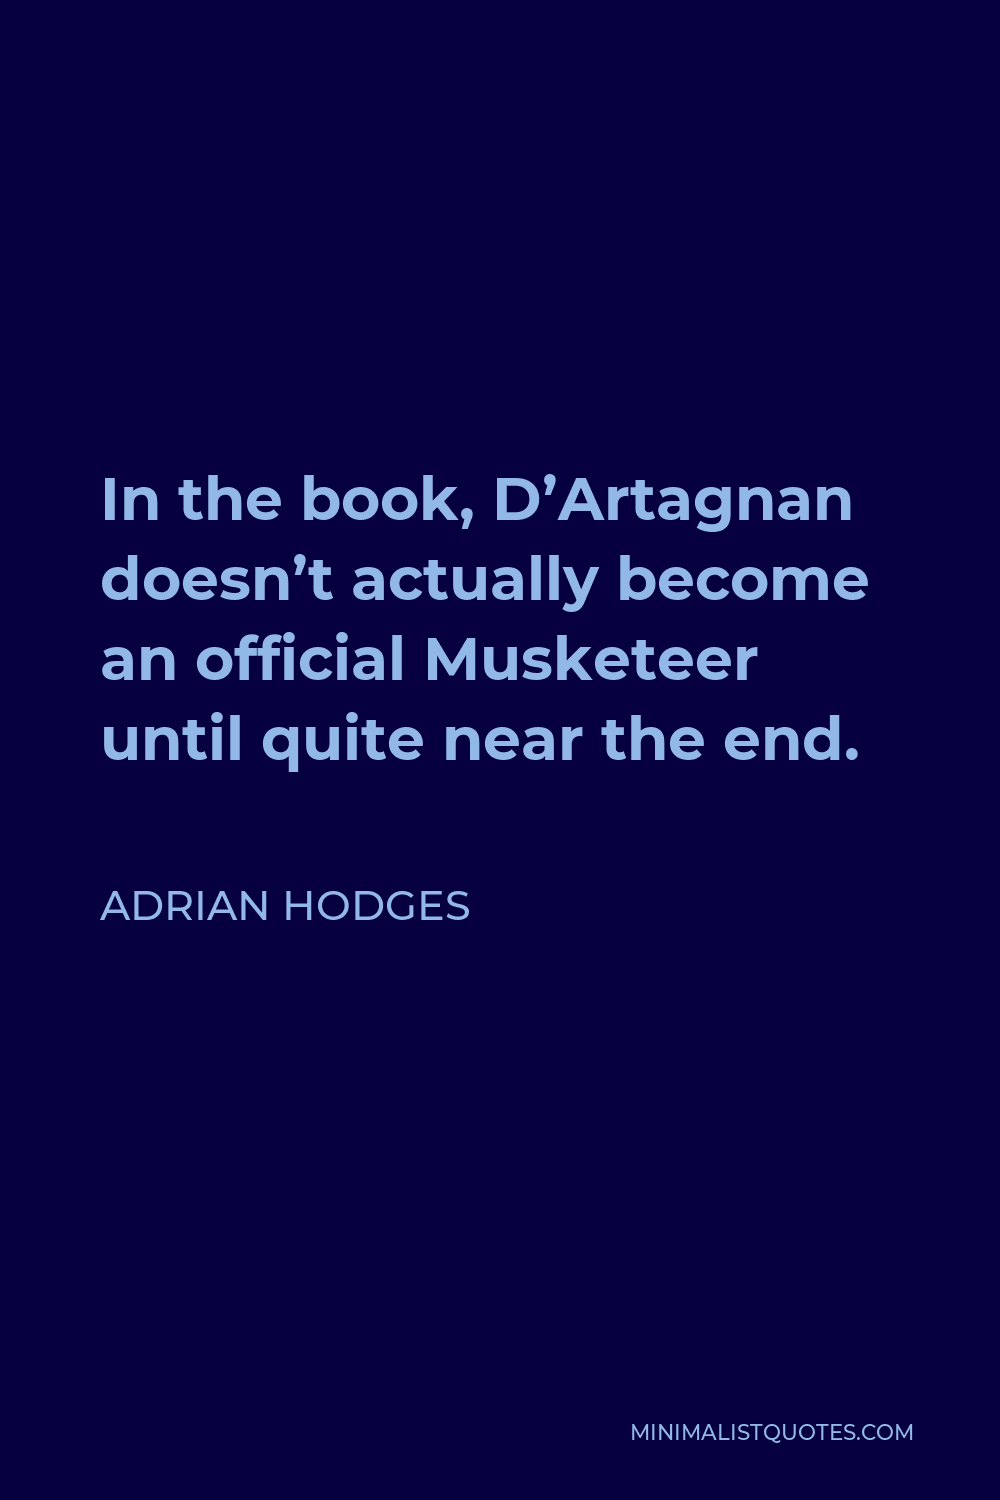 Adrian Hodges Quote - In the book, D’Artagnan doesn’t actually become an official Musketeer until quite near the end.